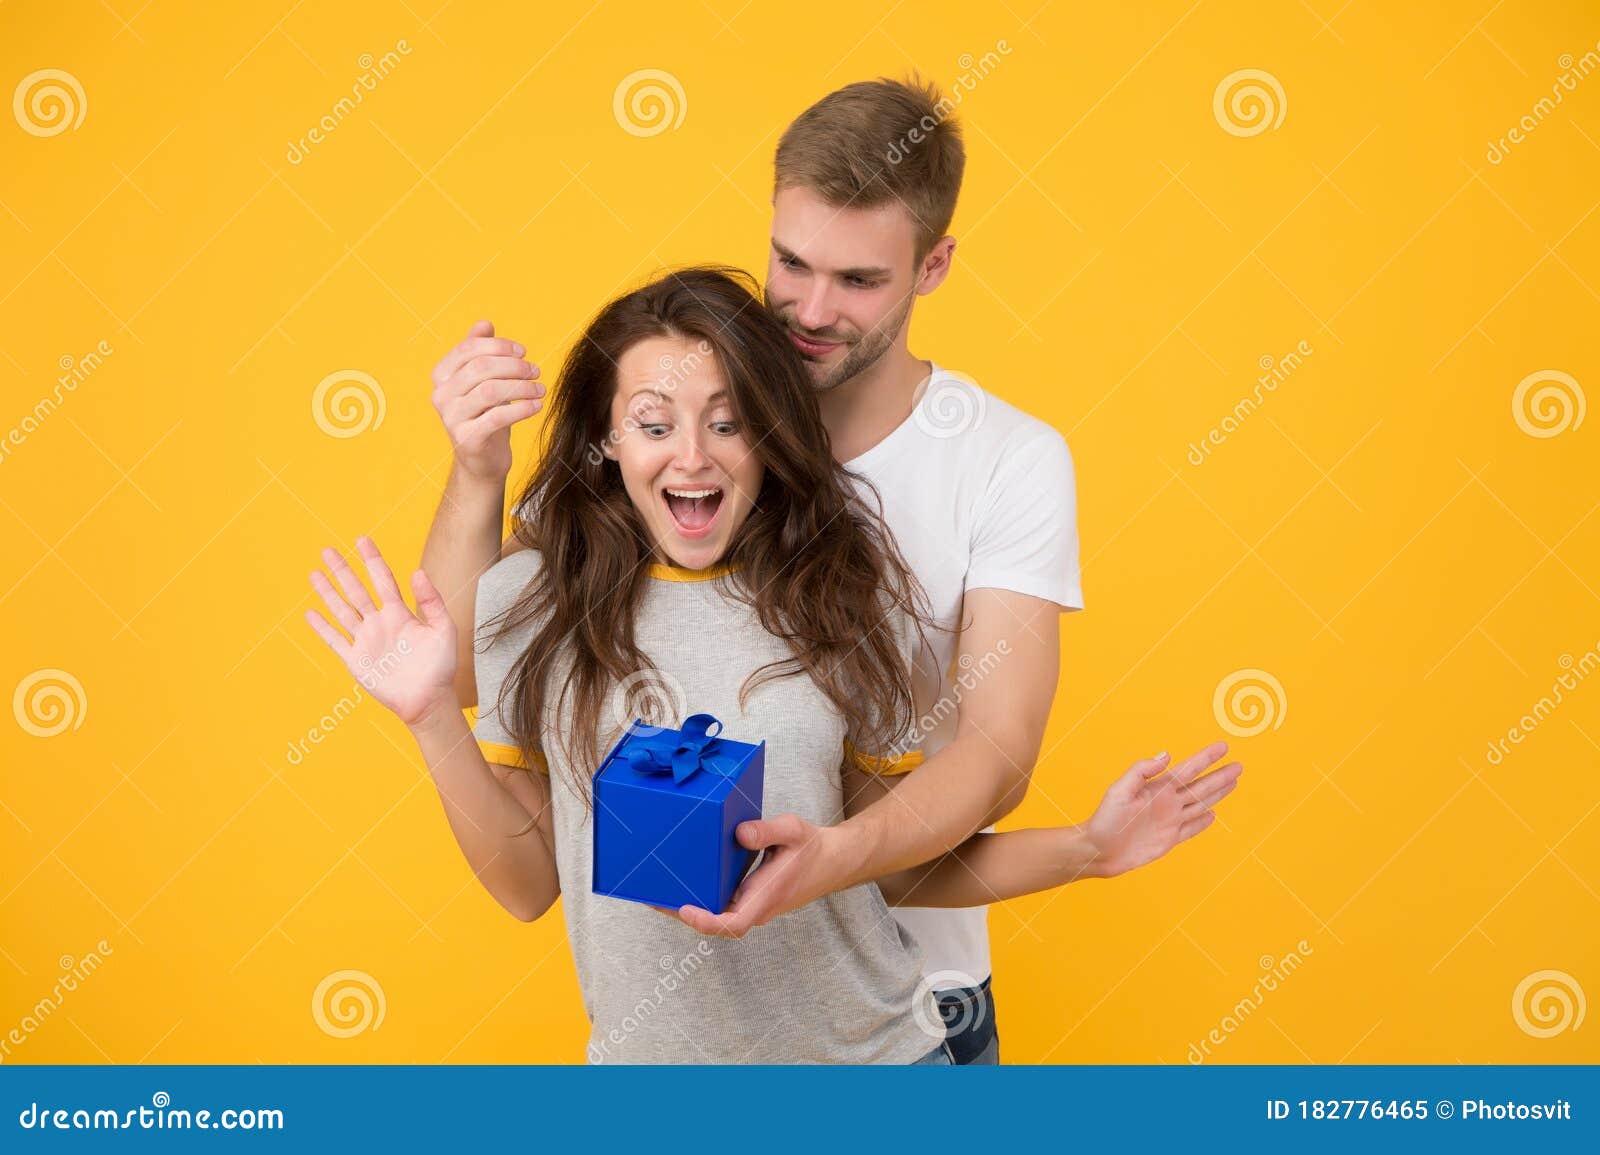 Make Her Wow. Surprised Woman Got Present from Man. Birthday Surprise ...